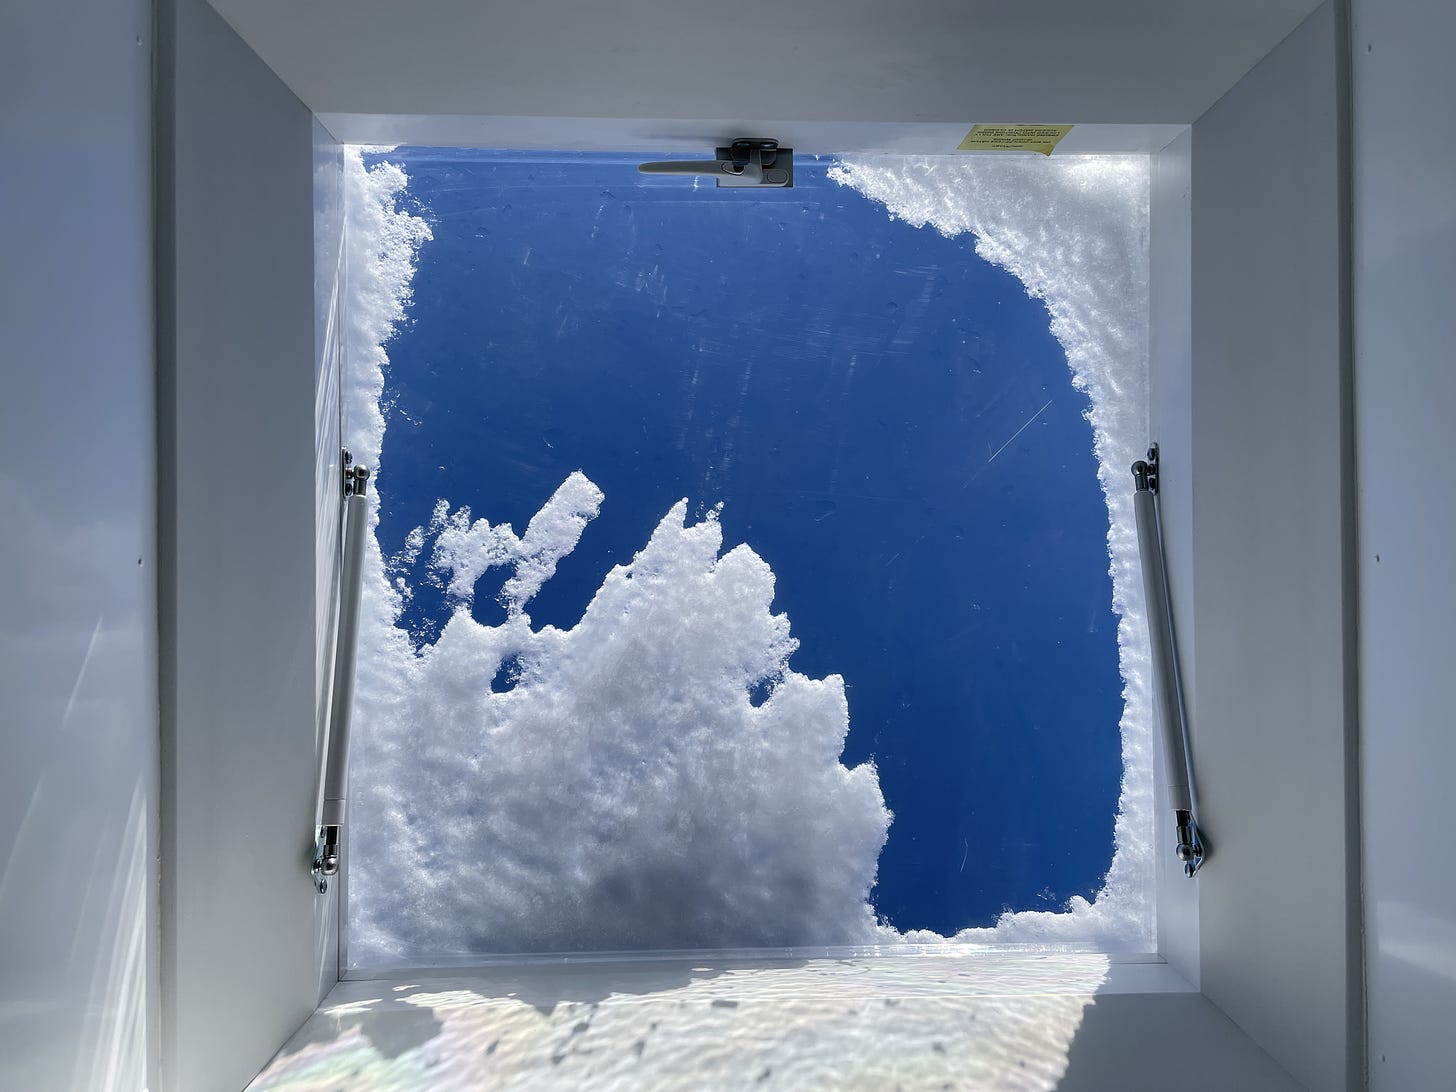 Looking up at a roof access hatch. There are blue skies and snow is resting on the plastic hatch.